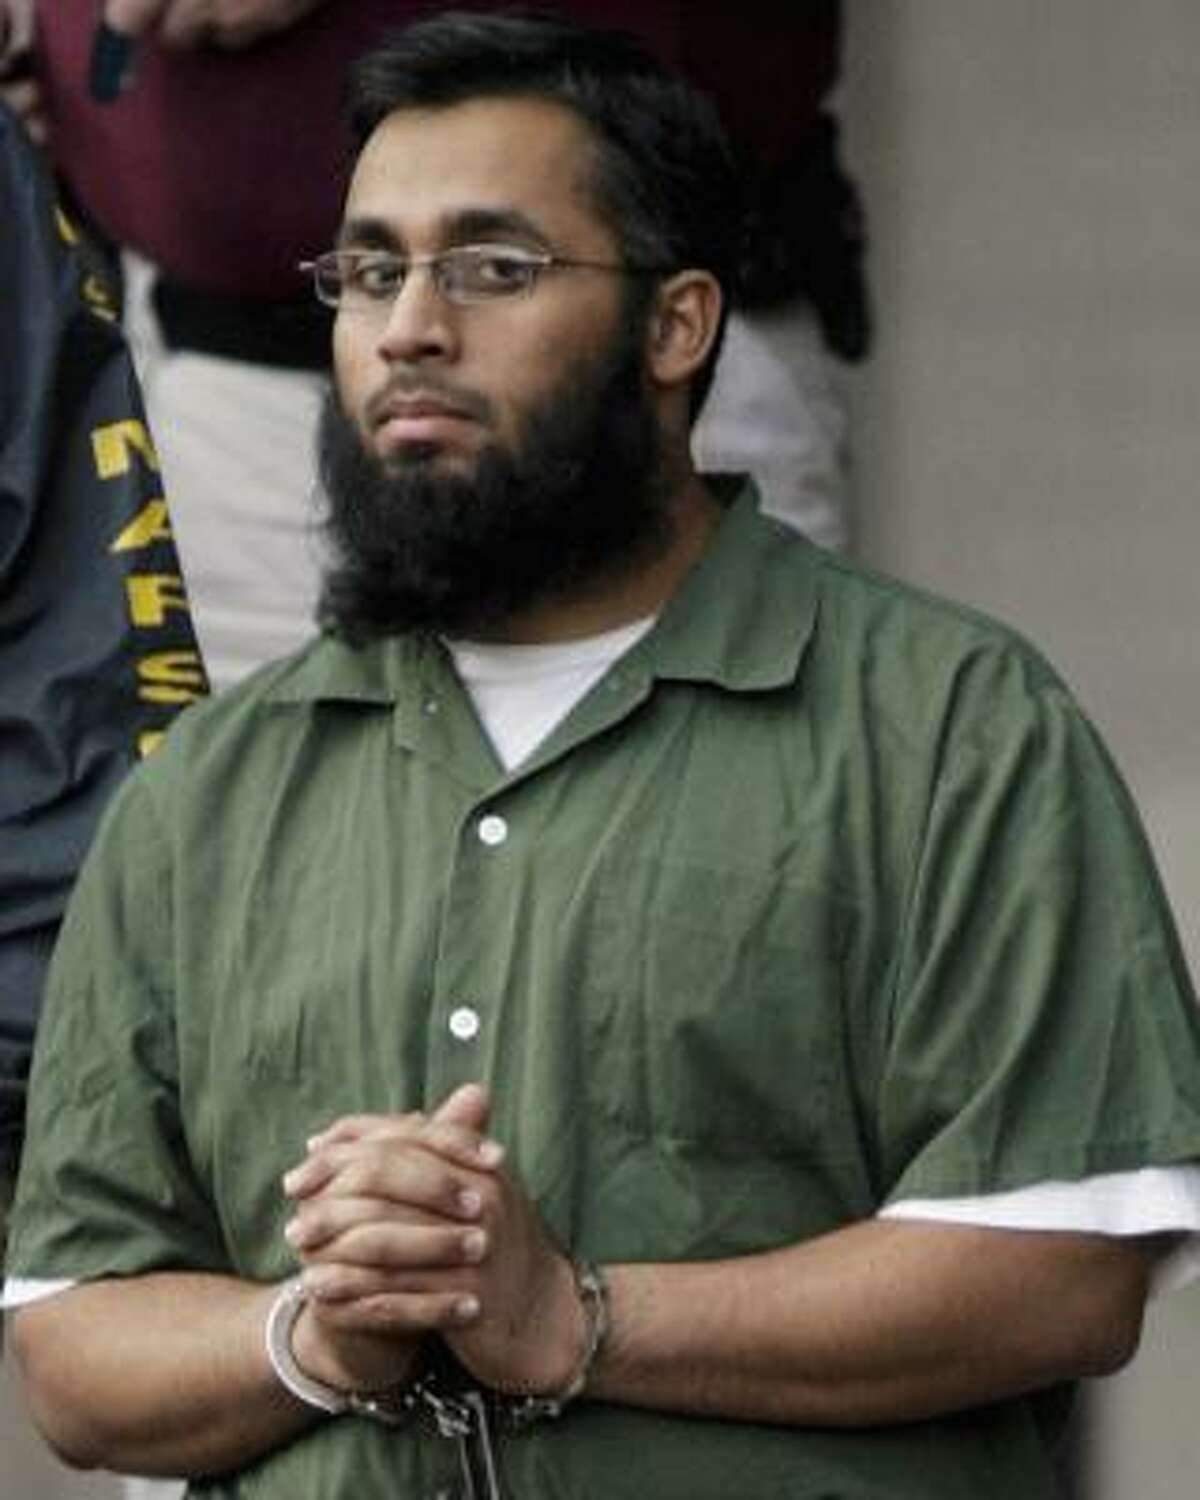 Shiraz Syed Qazi, 26, seen here in November 2006, and three others arrested last year are accused of material support of terrorism by training to fight with the Taliban against U.S.-led forces.